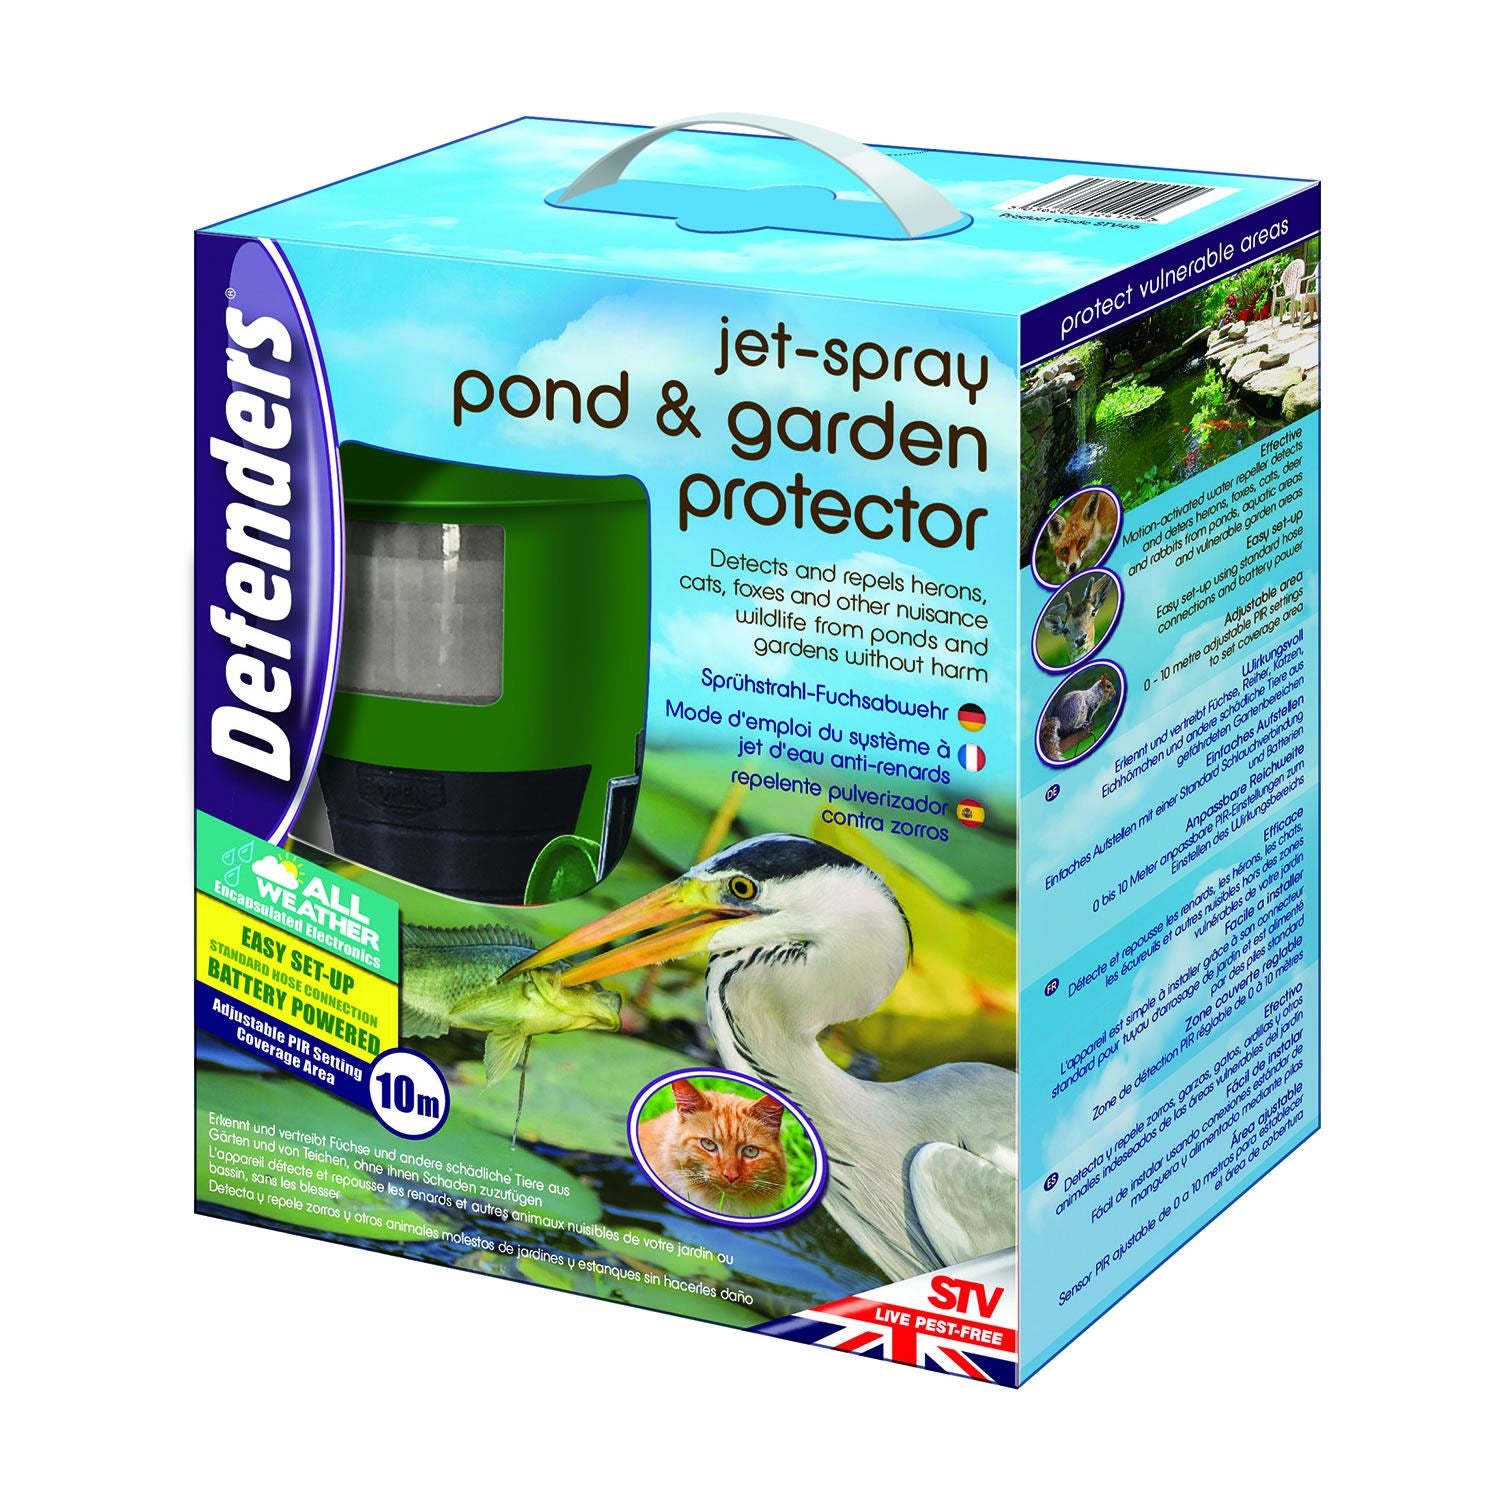 Defenders Jet Spray Pond And Garden Protector - Just Horse Riders